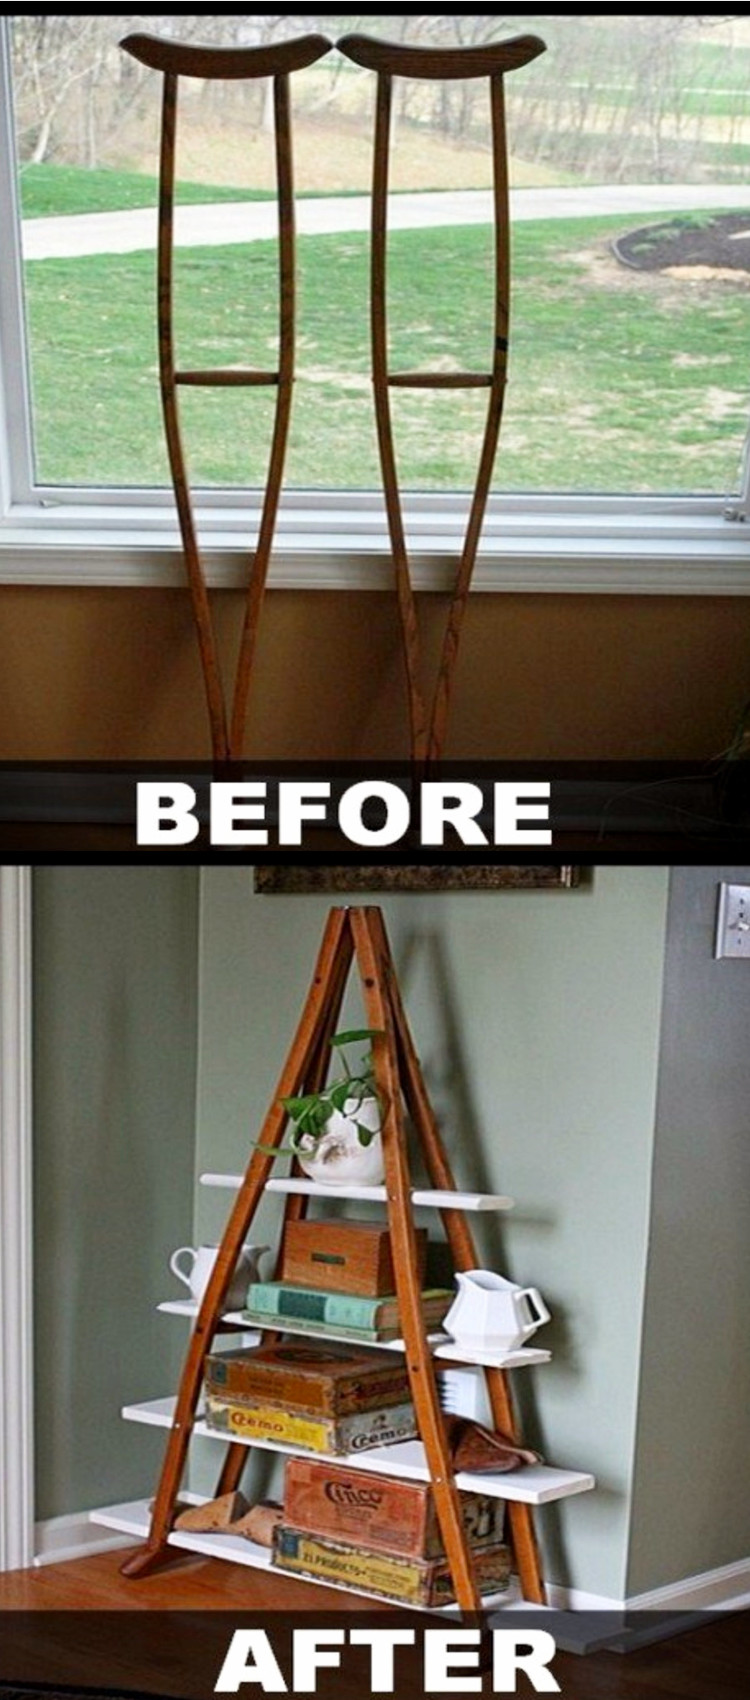 Upcycled Home Decor Ideas - Turn Old Crutches Into Shelves